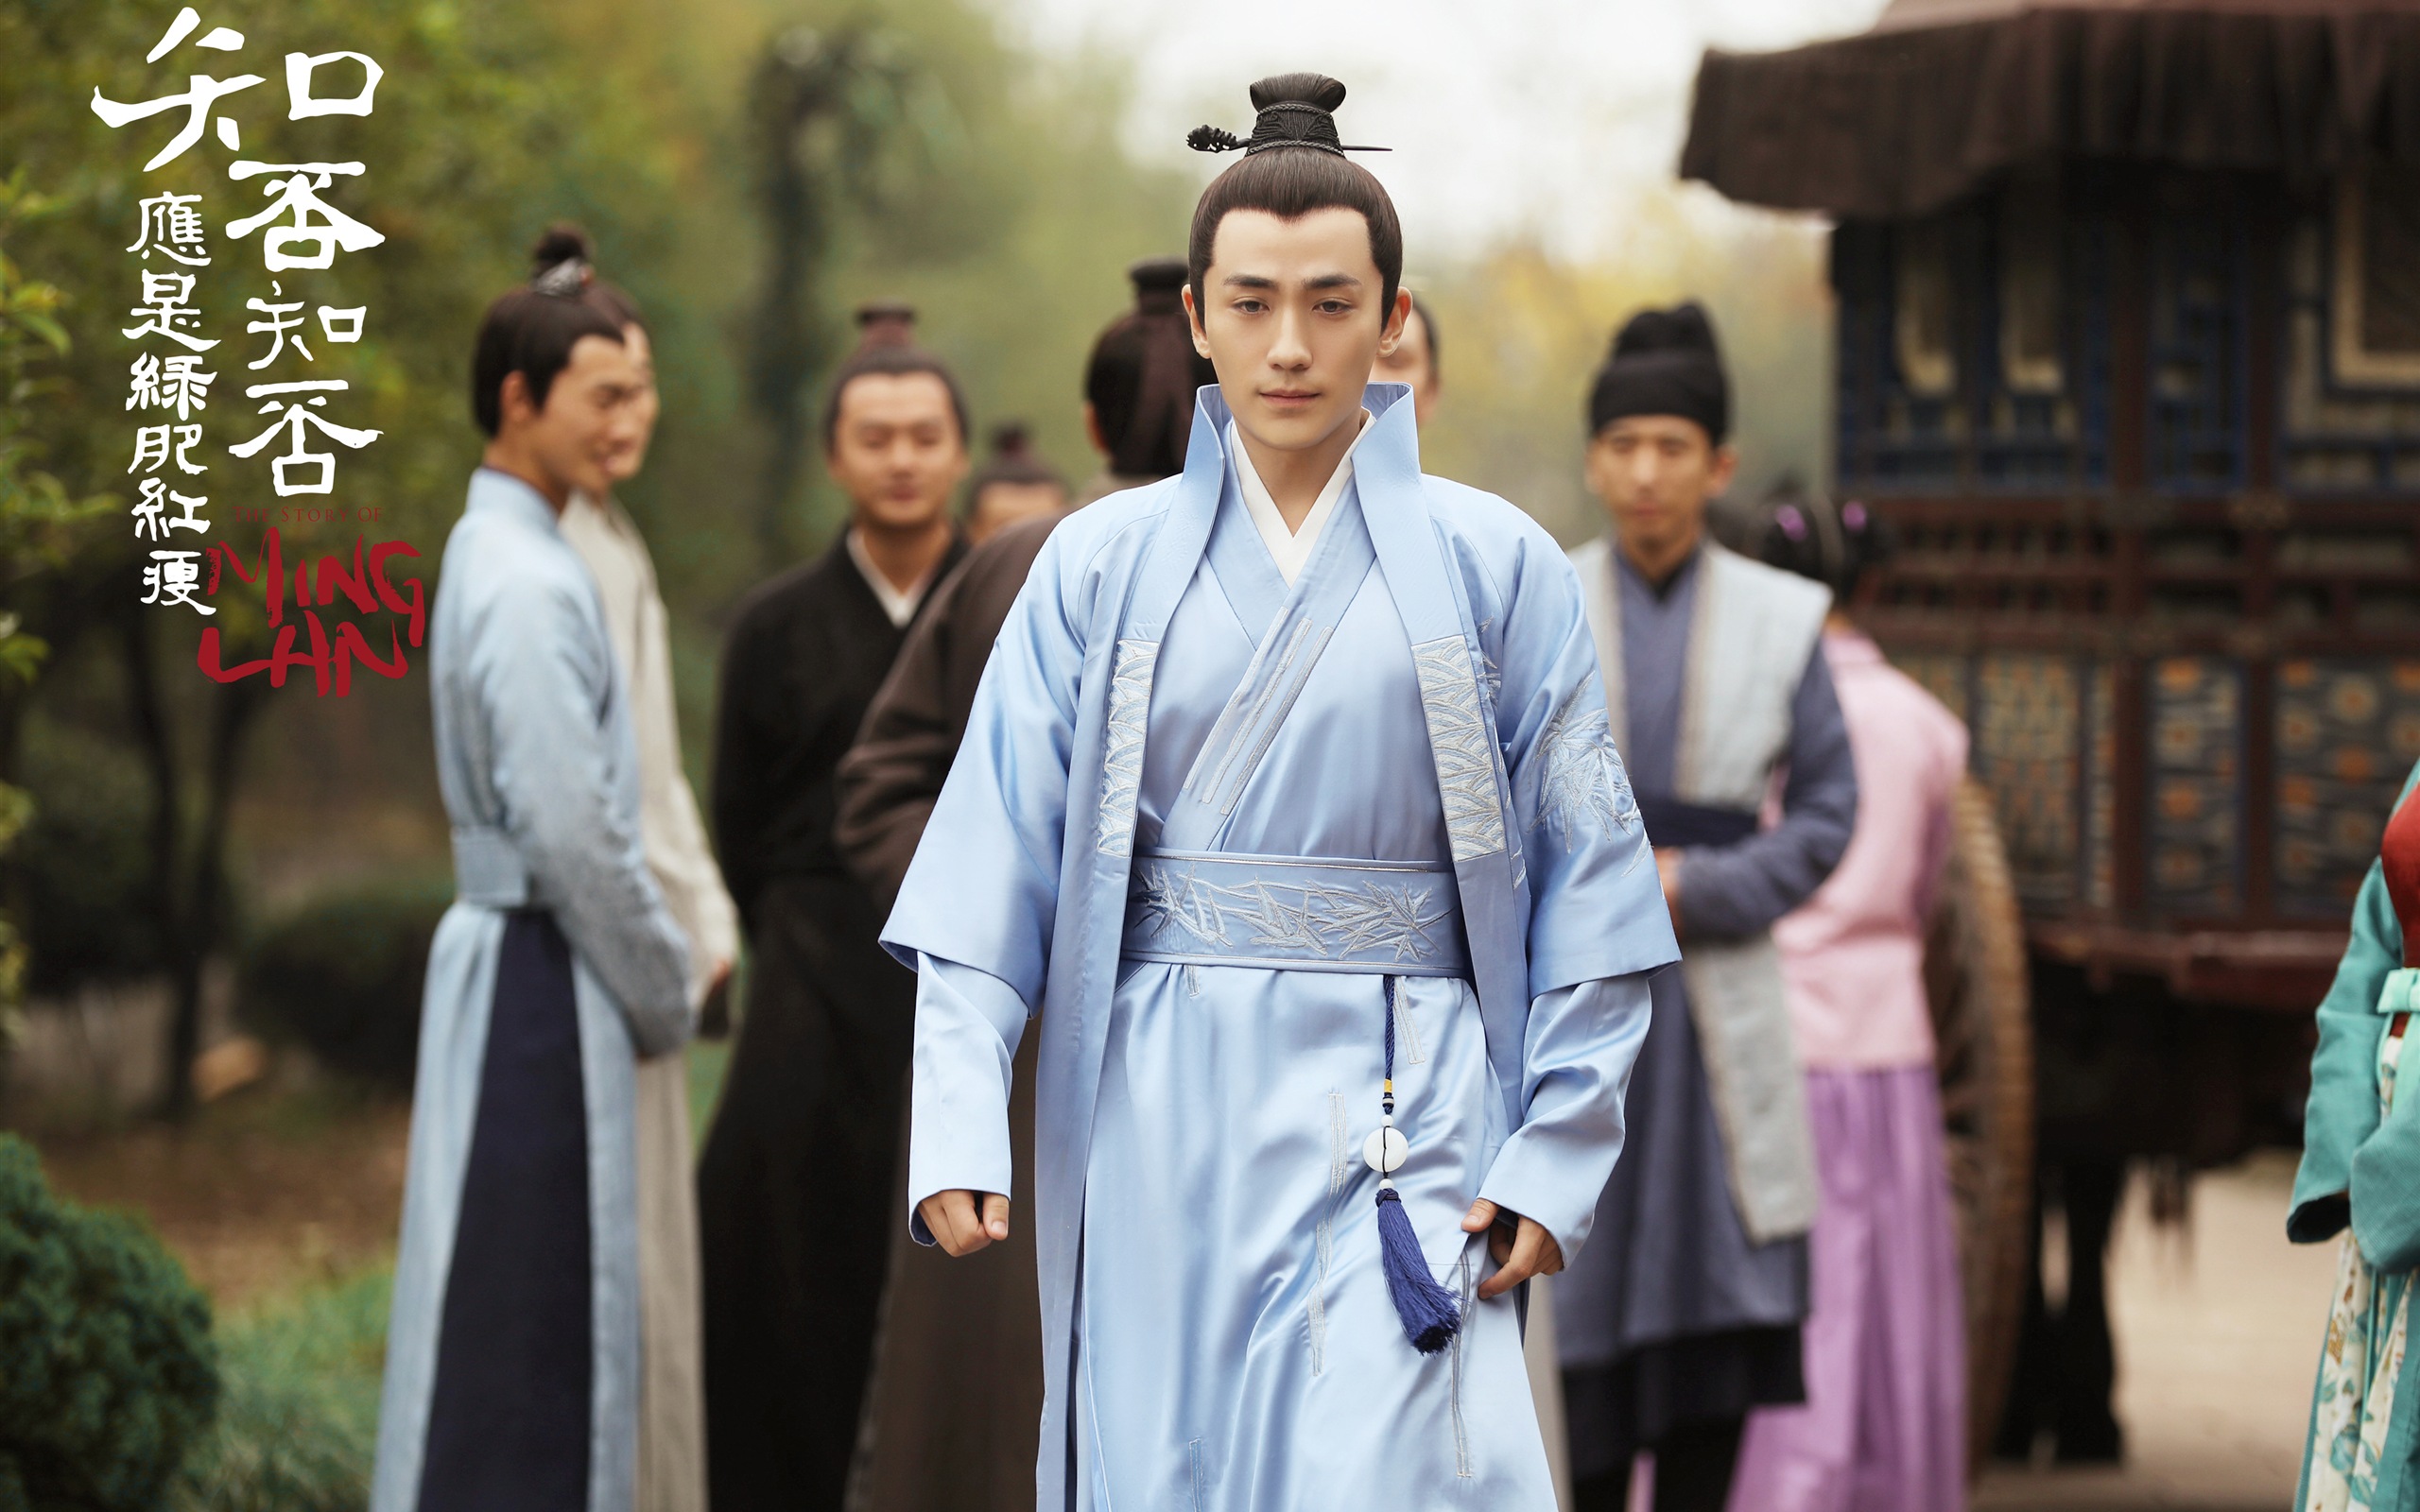 The Story Of MingLan, TV series HD wallpapers #54 - 2560x1600